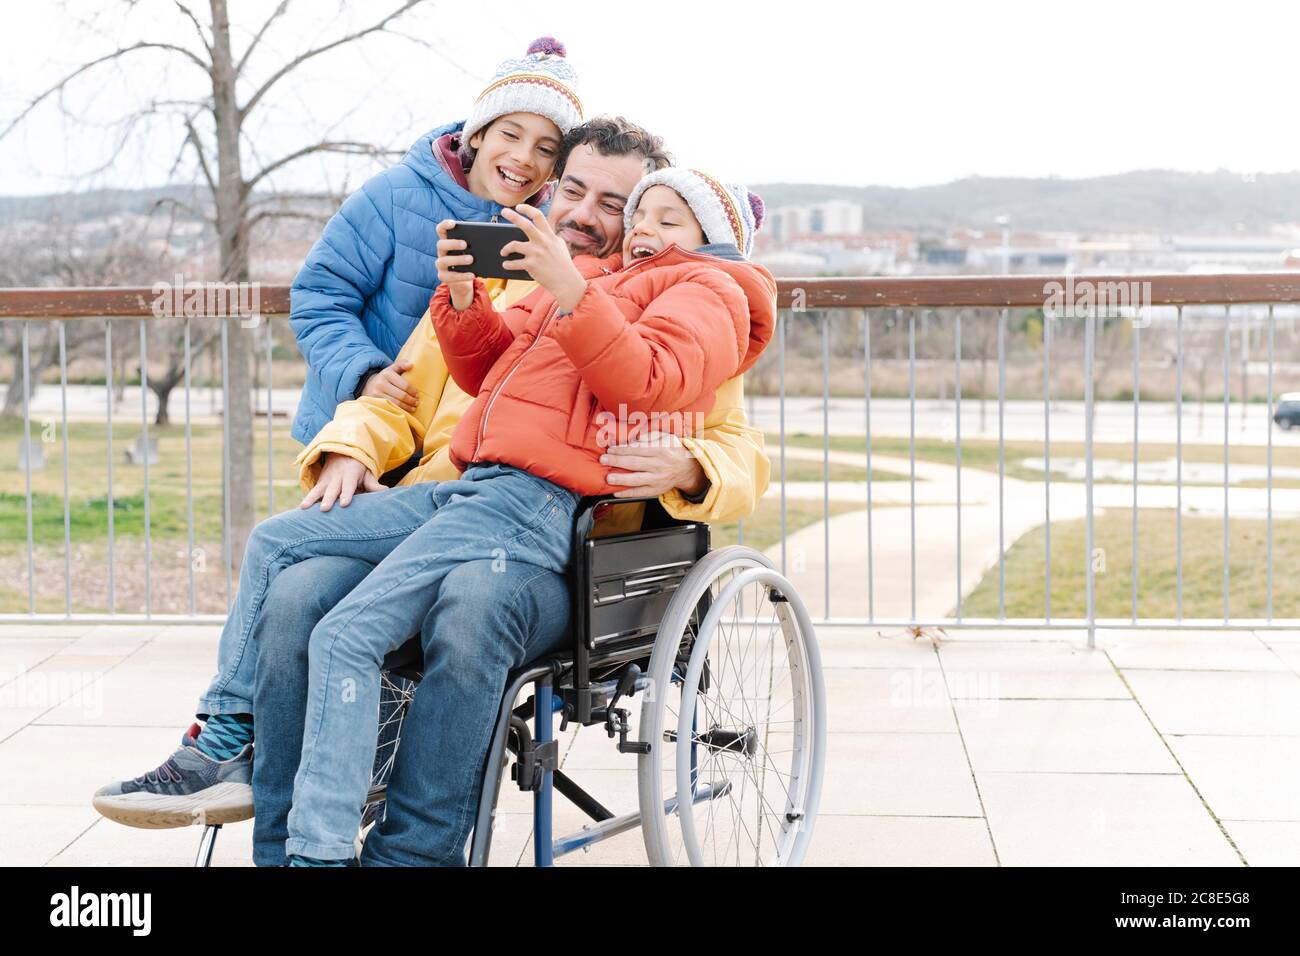 Cheerful boy taking selfie with father and brother on wheelchair in park Stock Photo